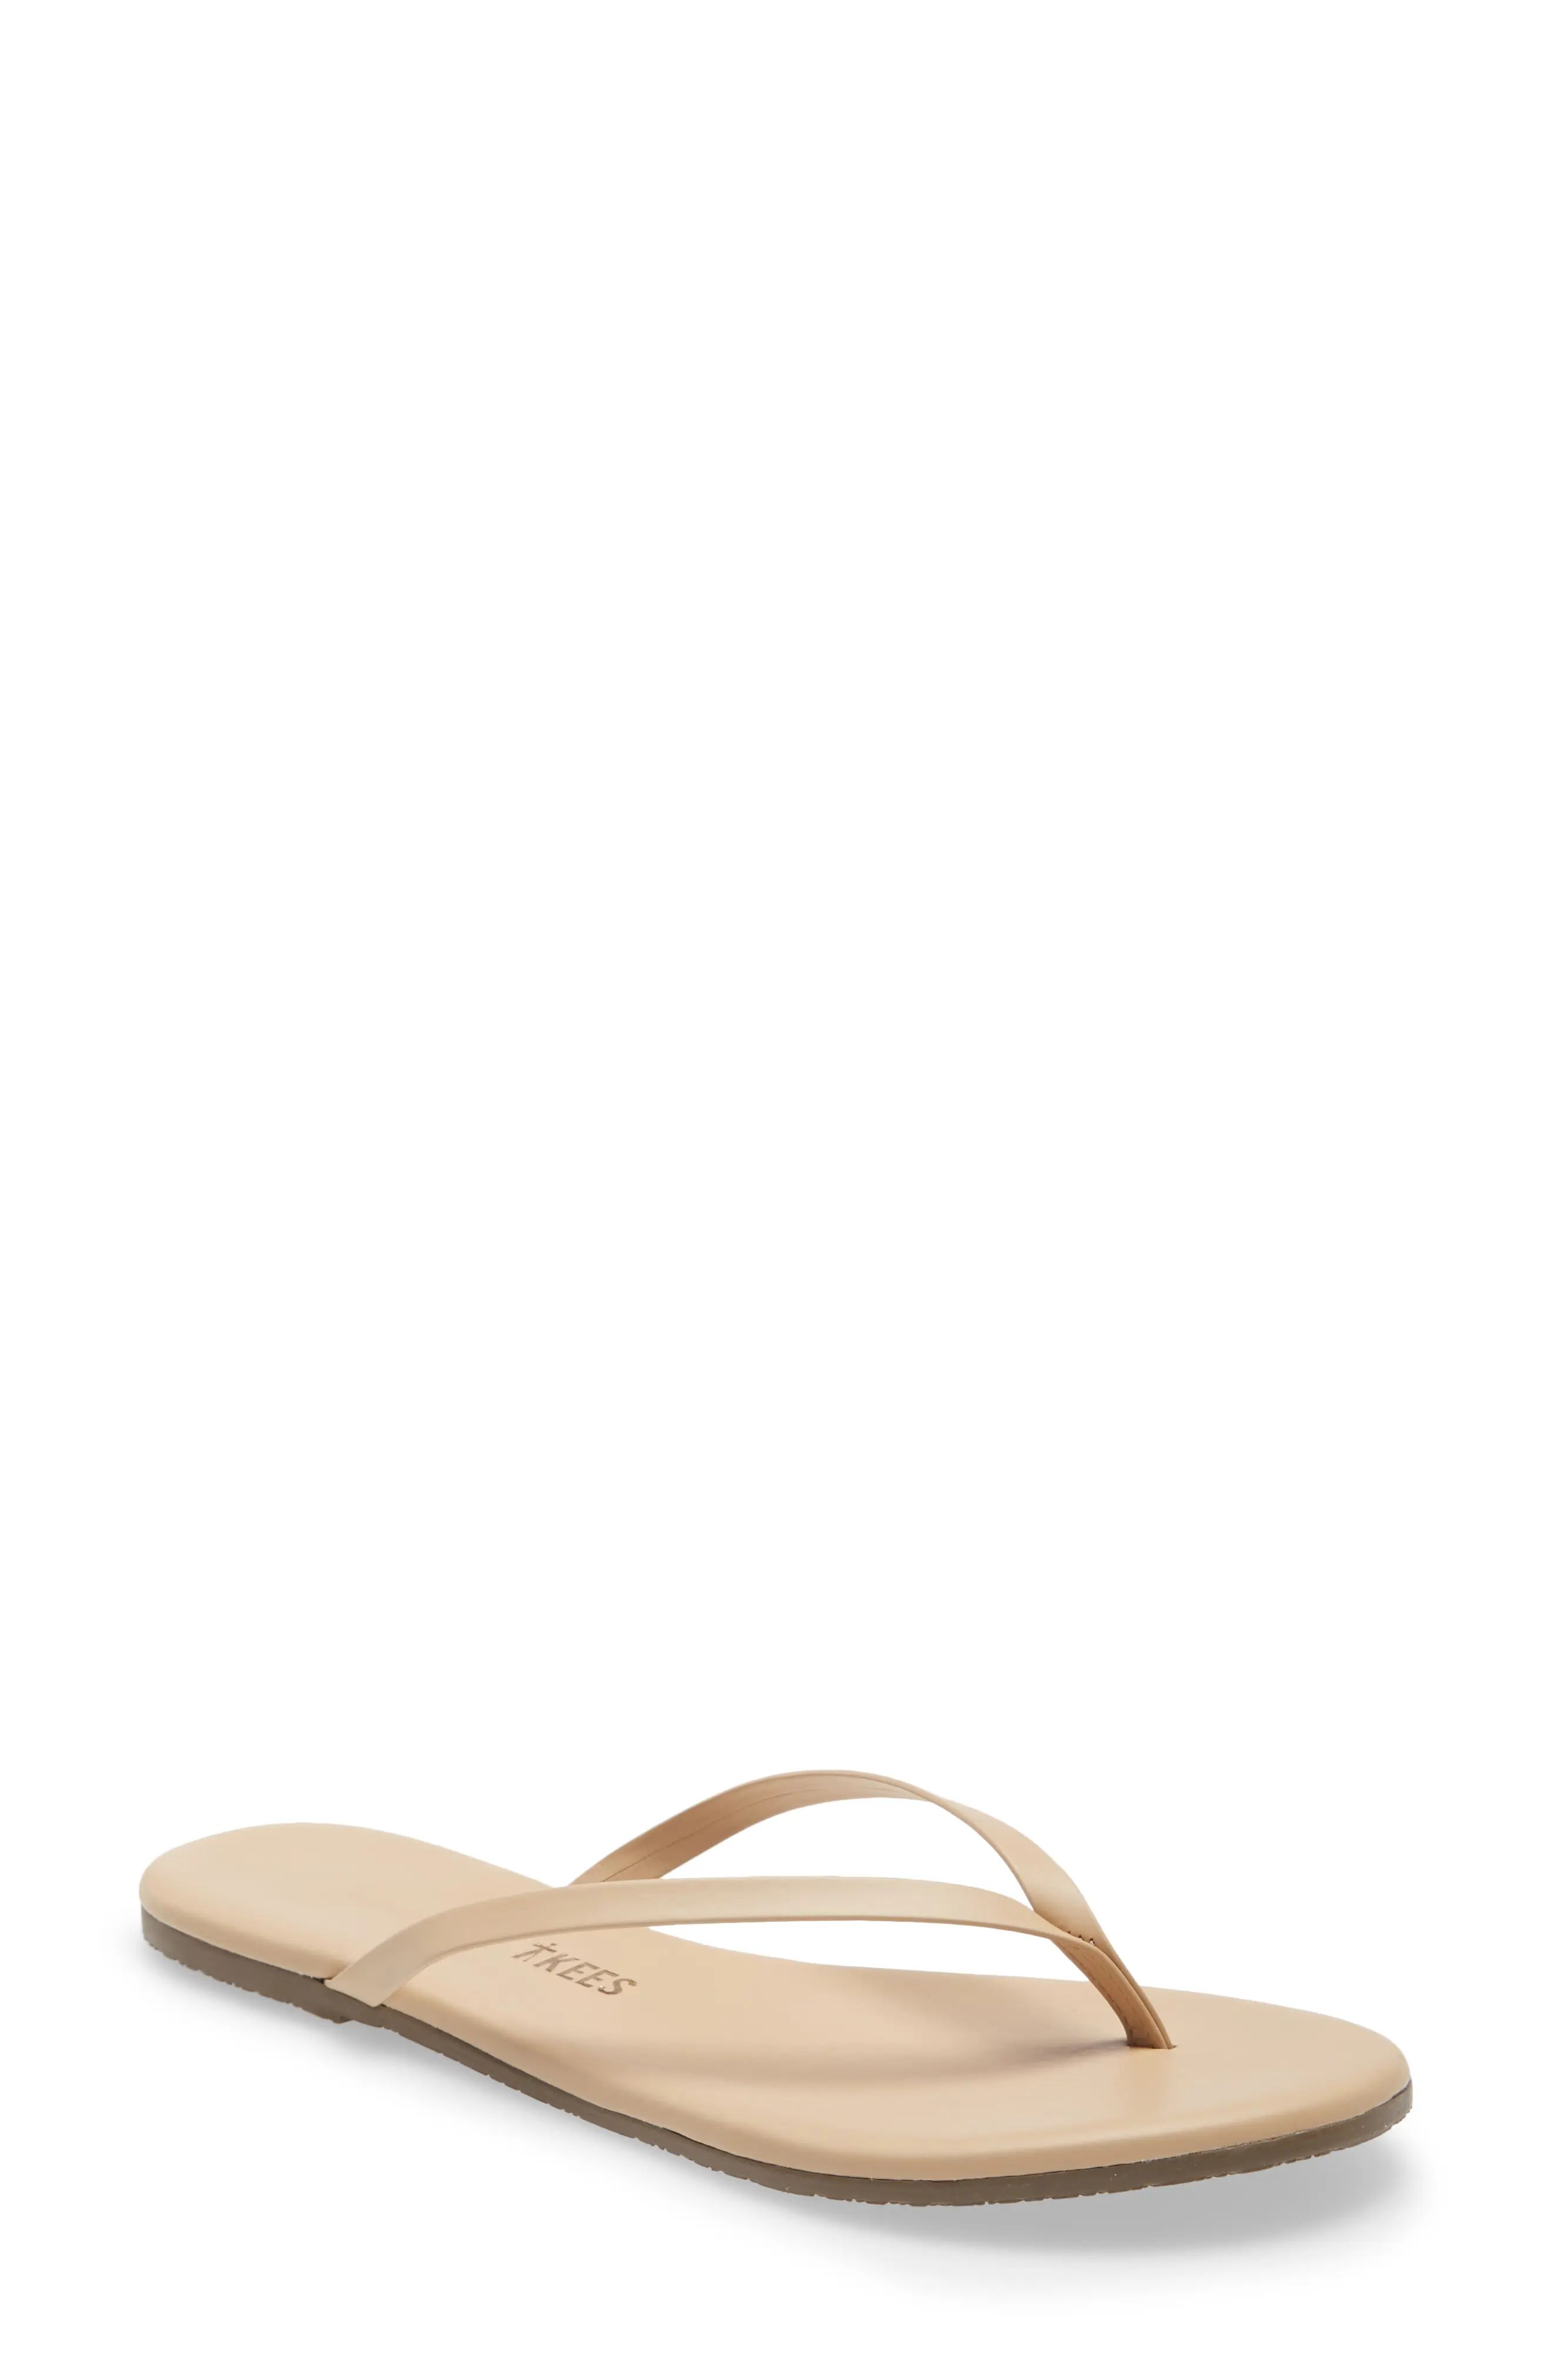 TKEES Foundations Matte Flip Flop, Size 10 in Sunkissed at Nordstrom | Nordstrom